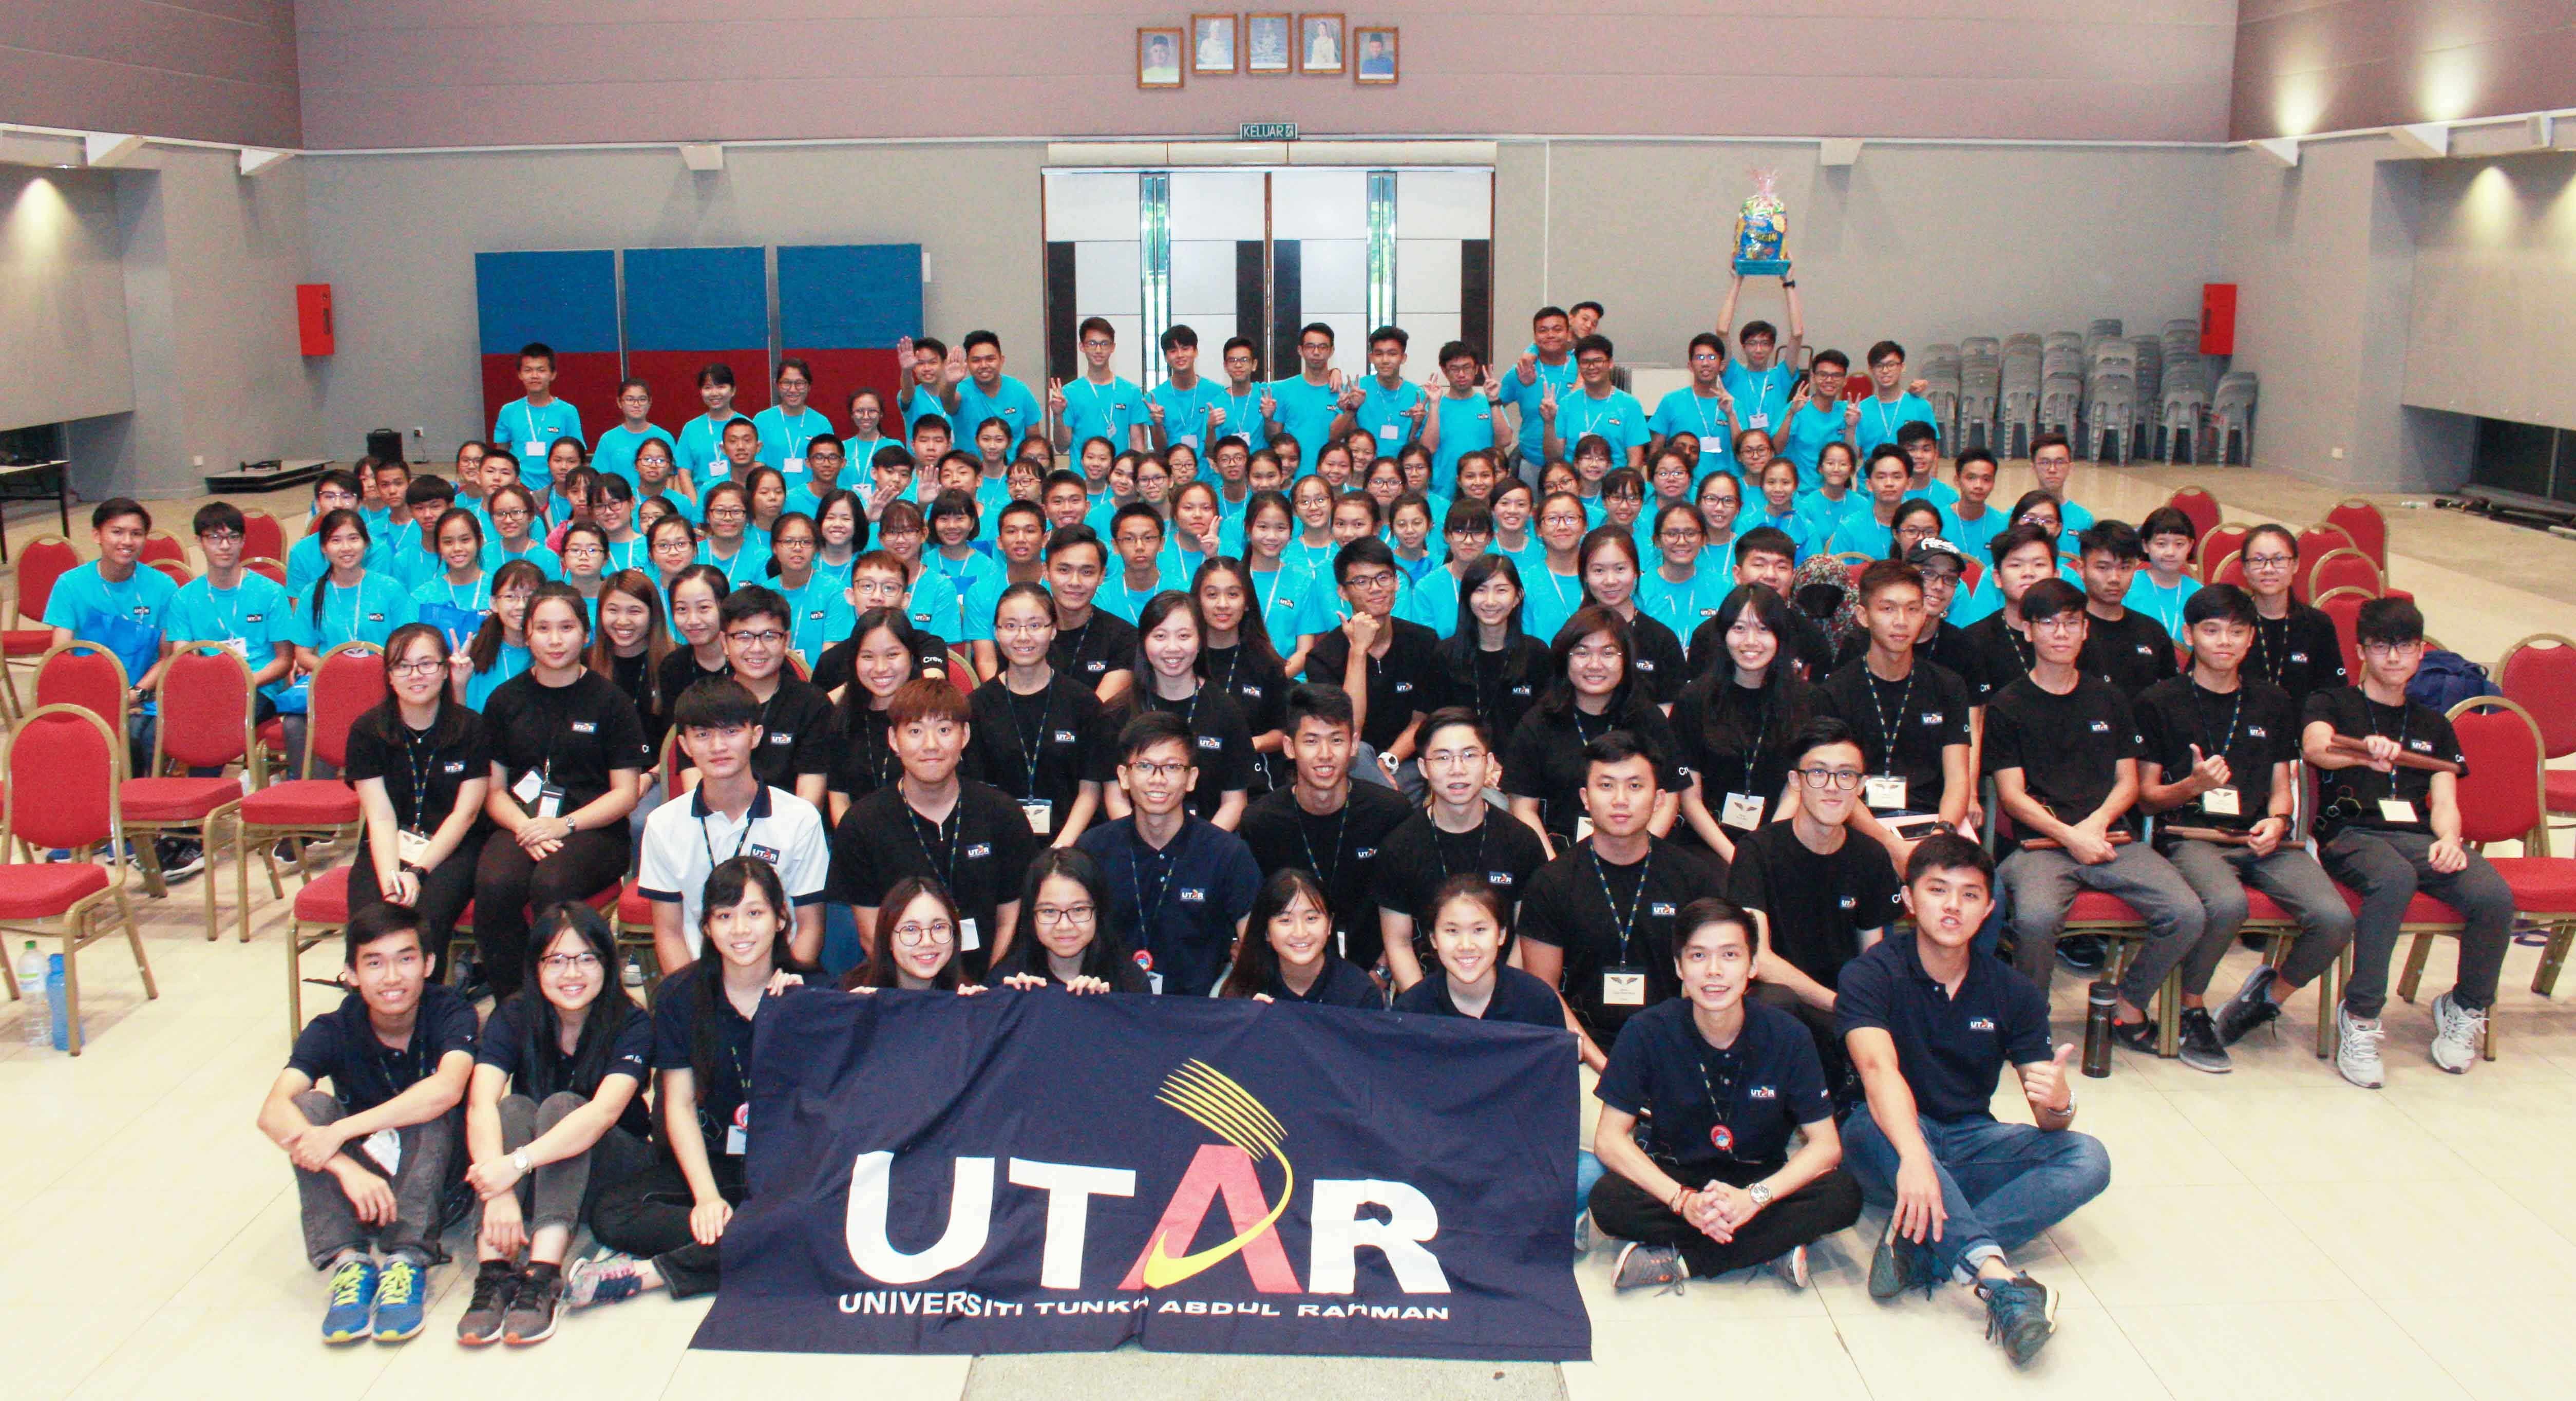 UTAR Leadership Camp 2018 Organising Committee and the participants